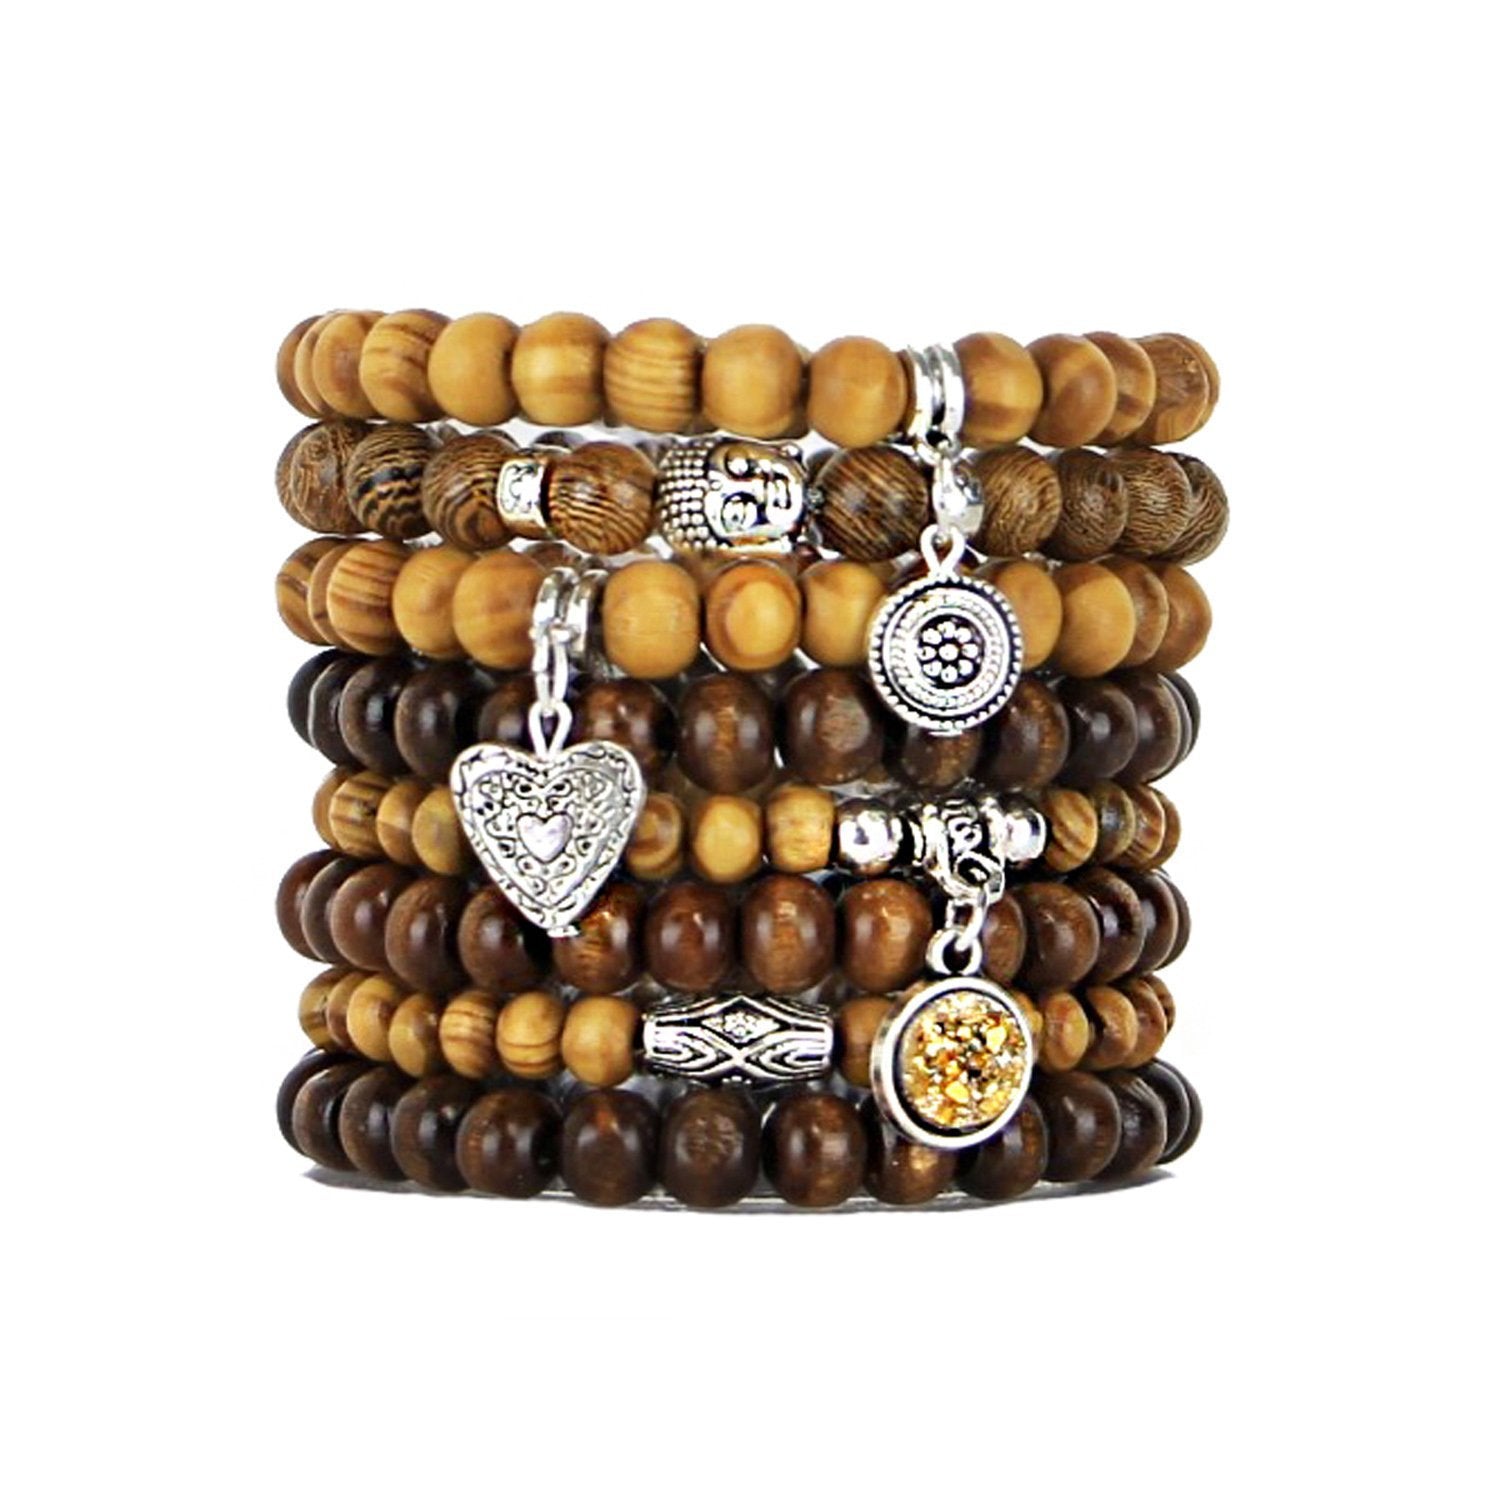 Set of 8 Stretch Beaded Stacking Bracelets with Wood and Metal Alloy Beads